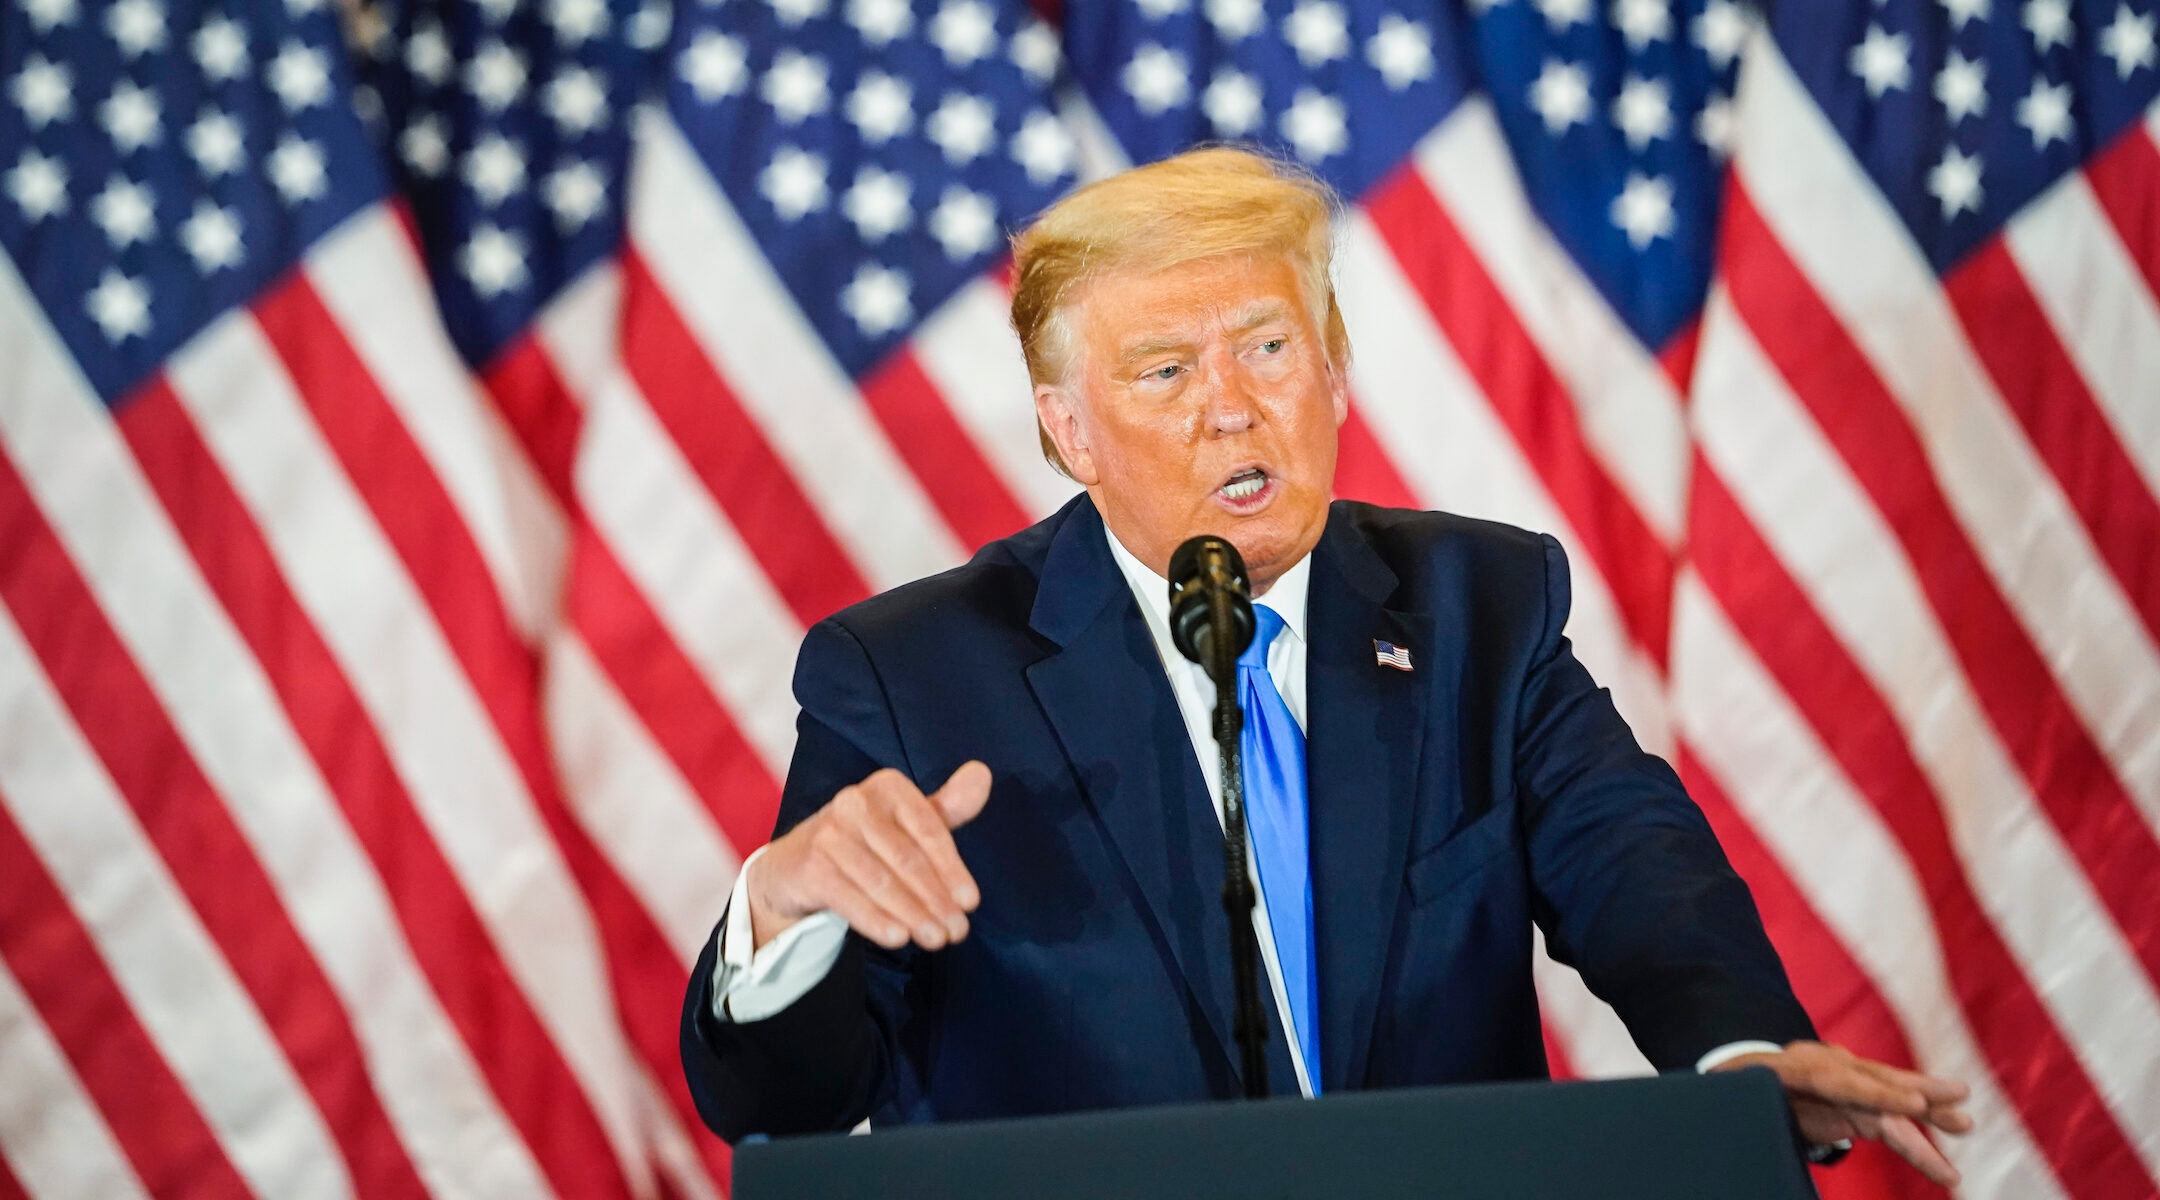 President Donald J. Trump speaks during an election event at the White House in the early morning hours on November 4, 2020 in Washington, D.C. Liberal Jews fear that even if the president is defeated, his ideology has not been repudiated. (Jabin Botsford/The Washington Post via Getty Images)